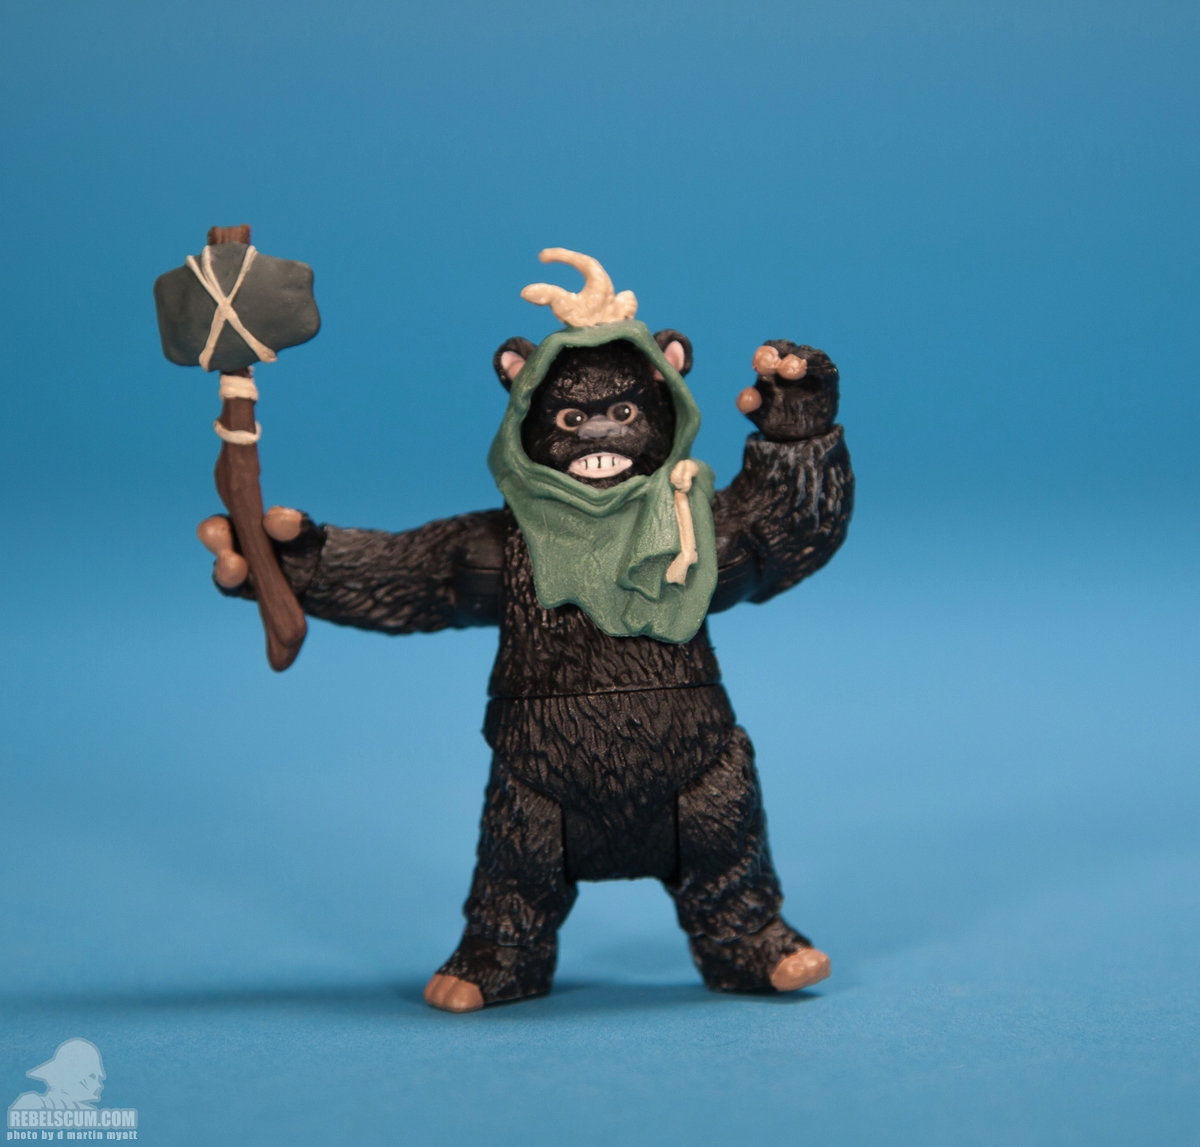 Ewok_Scouts_The_Vintage_Collection_TVC_Kmart-26.jpg